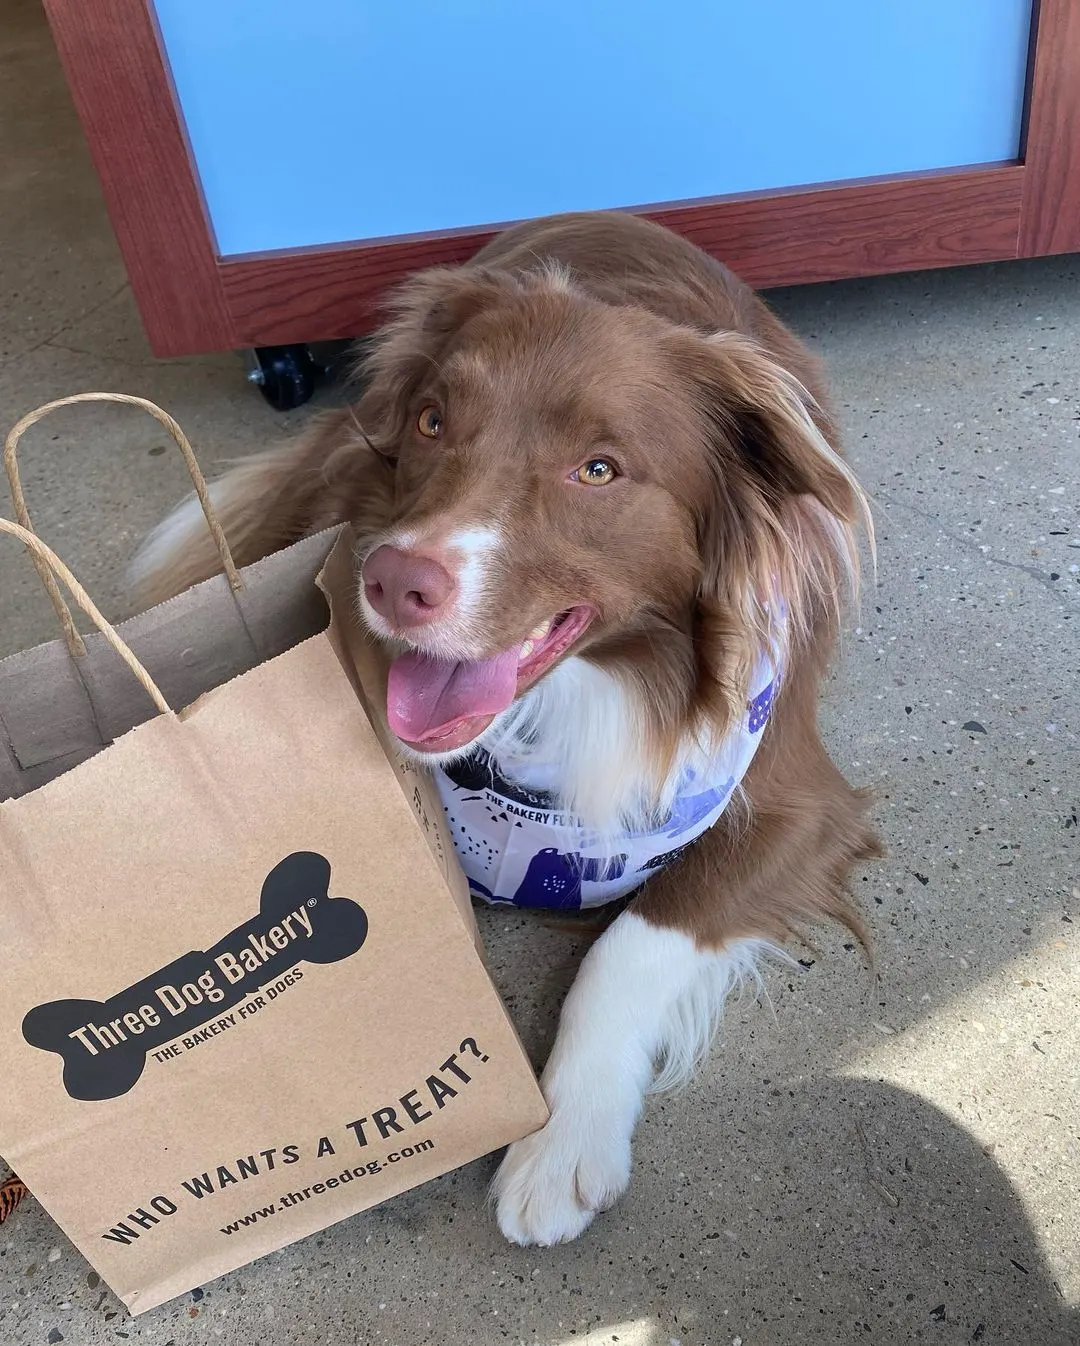 Dog laying down with bag of treats from three dog bakery in nashville